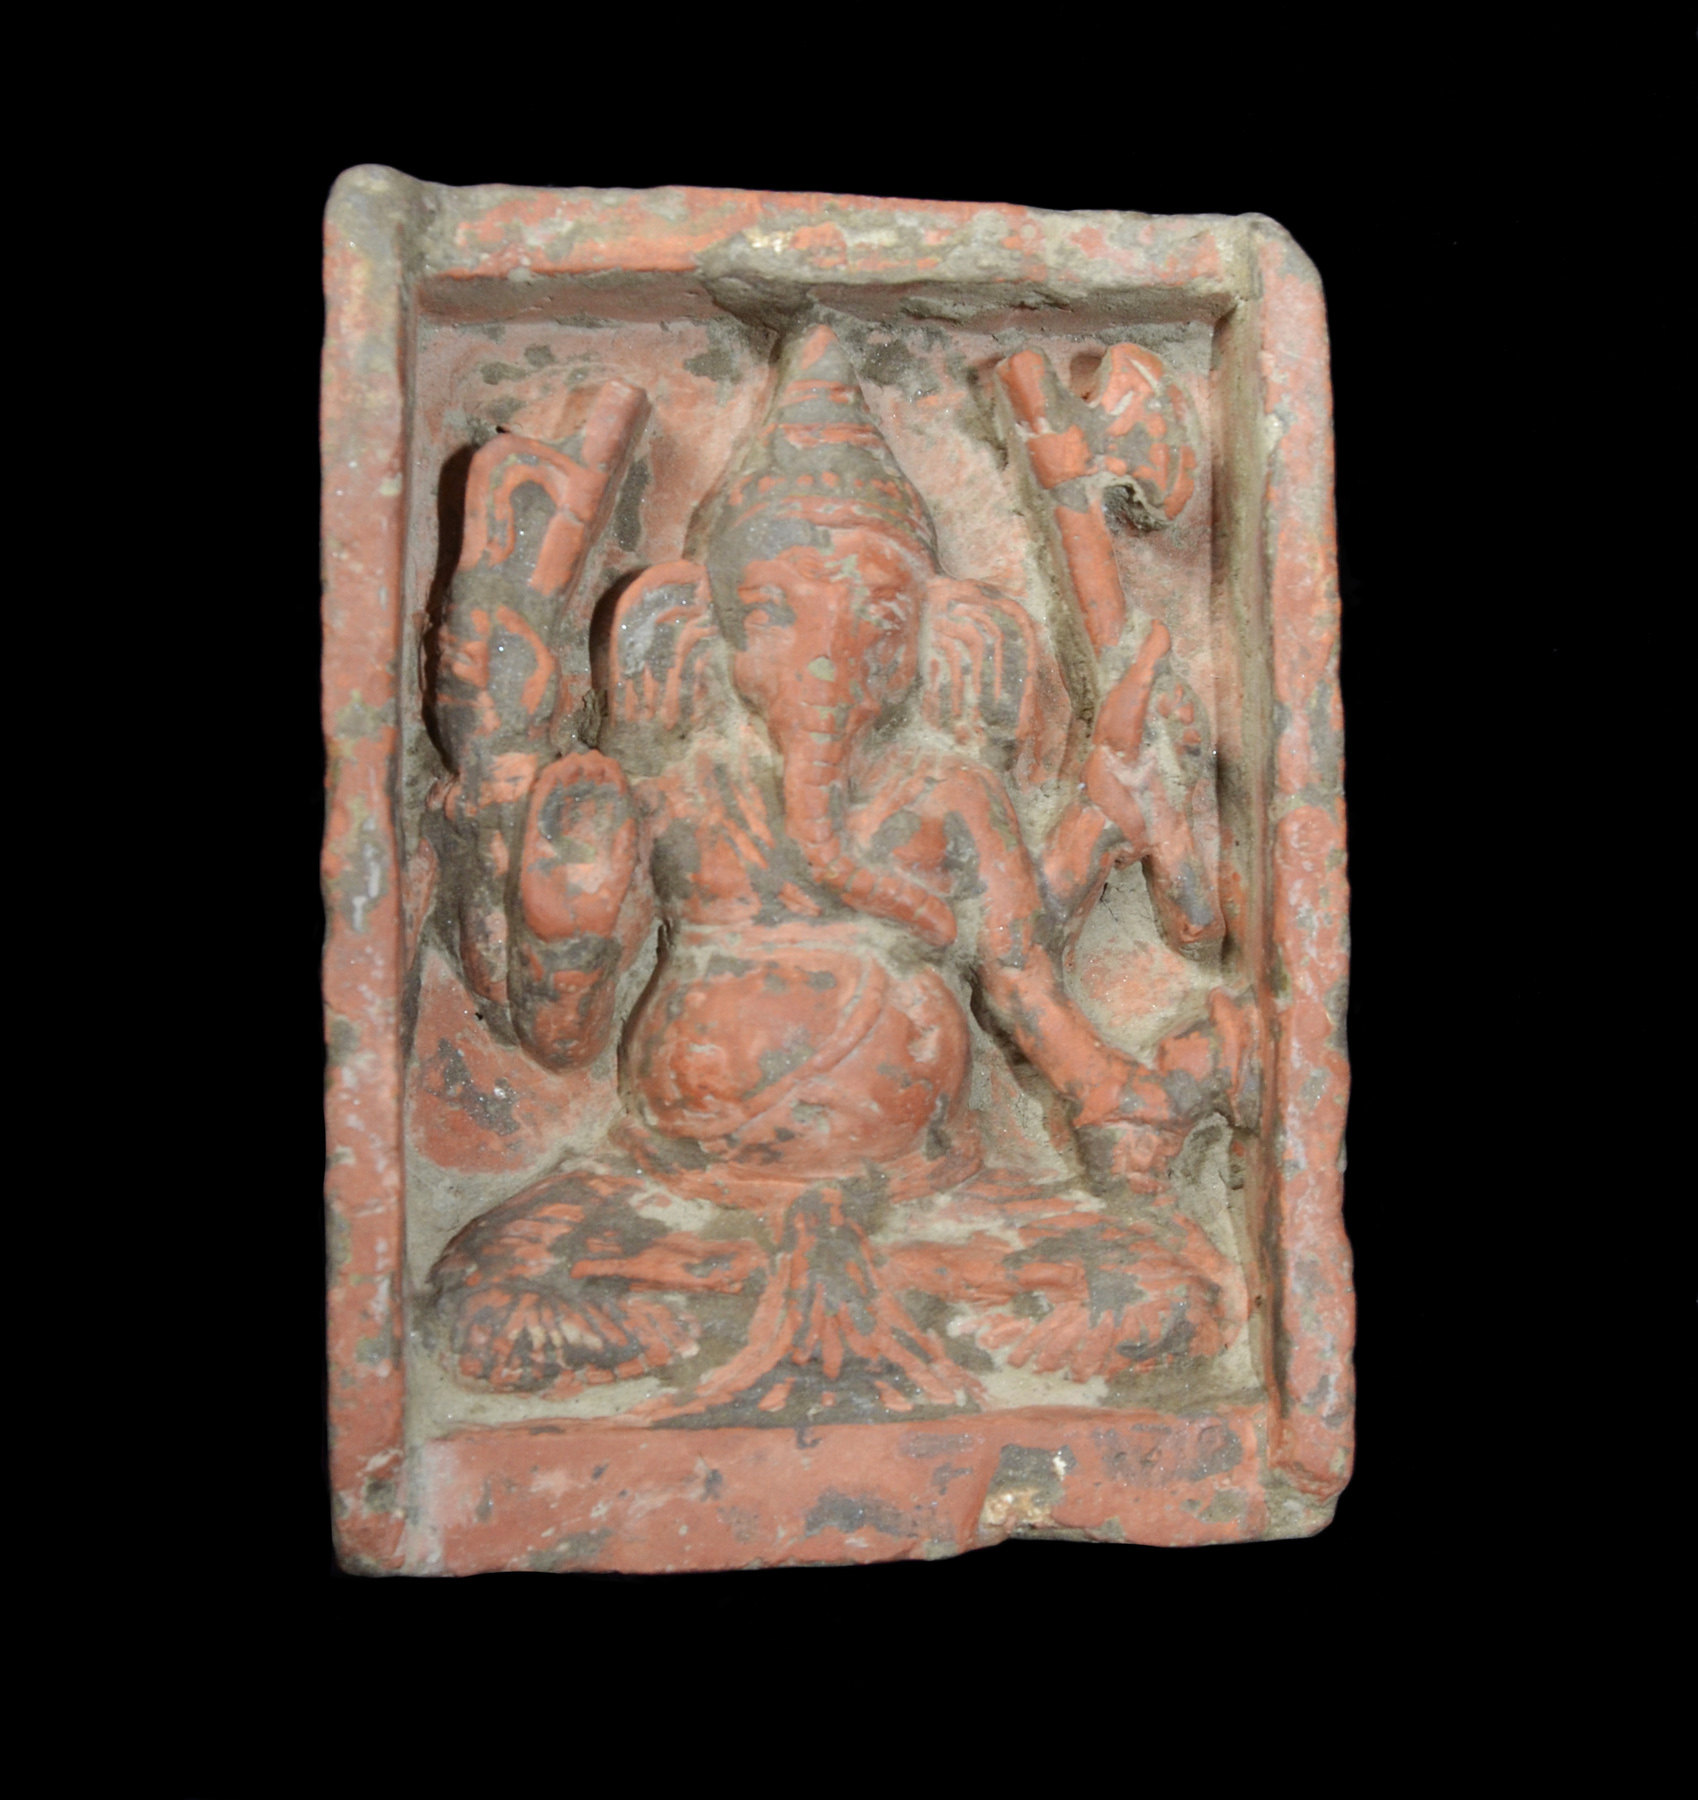 Fine Clay Votive Temple Tile depicting the Deity Ganesh West Bengal India 13th-16th Century